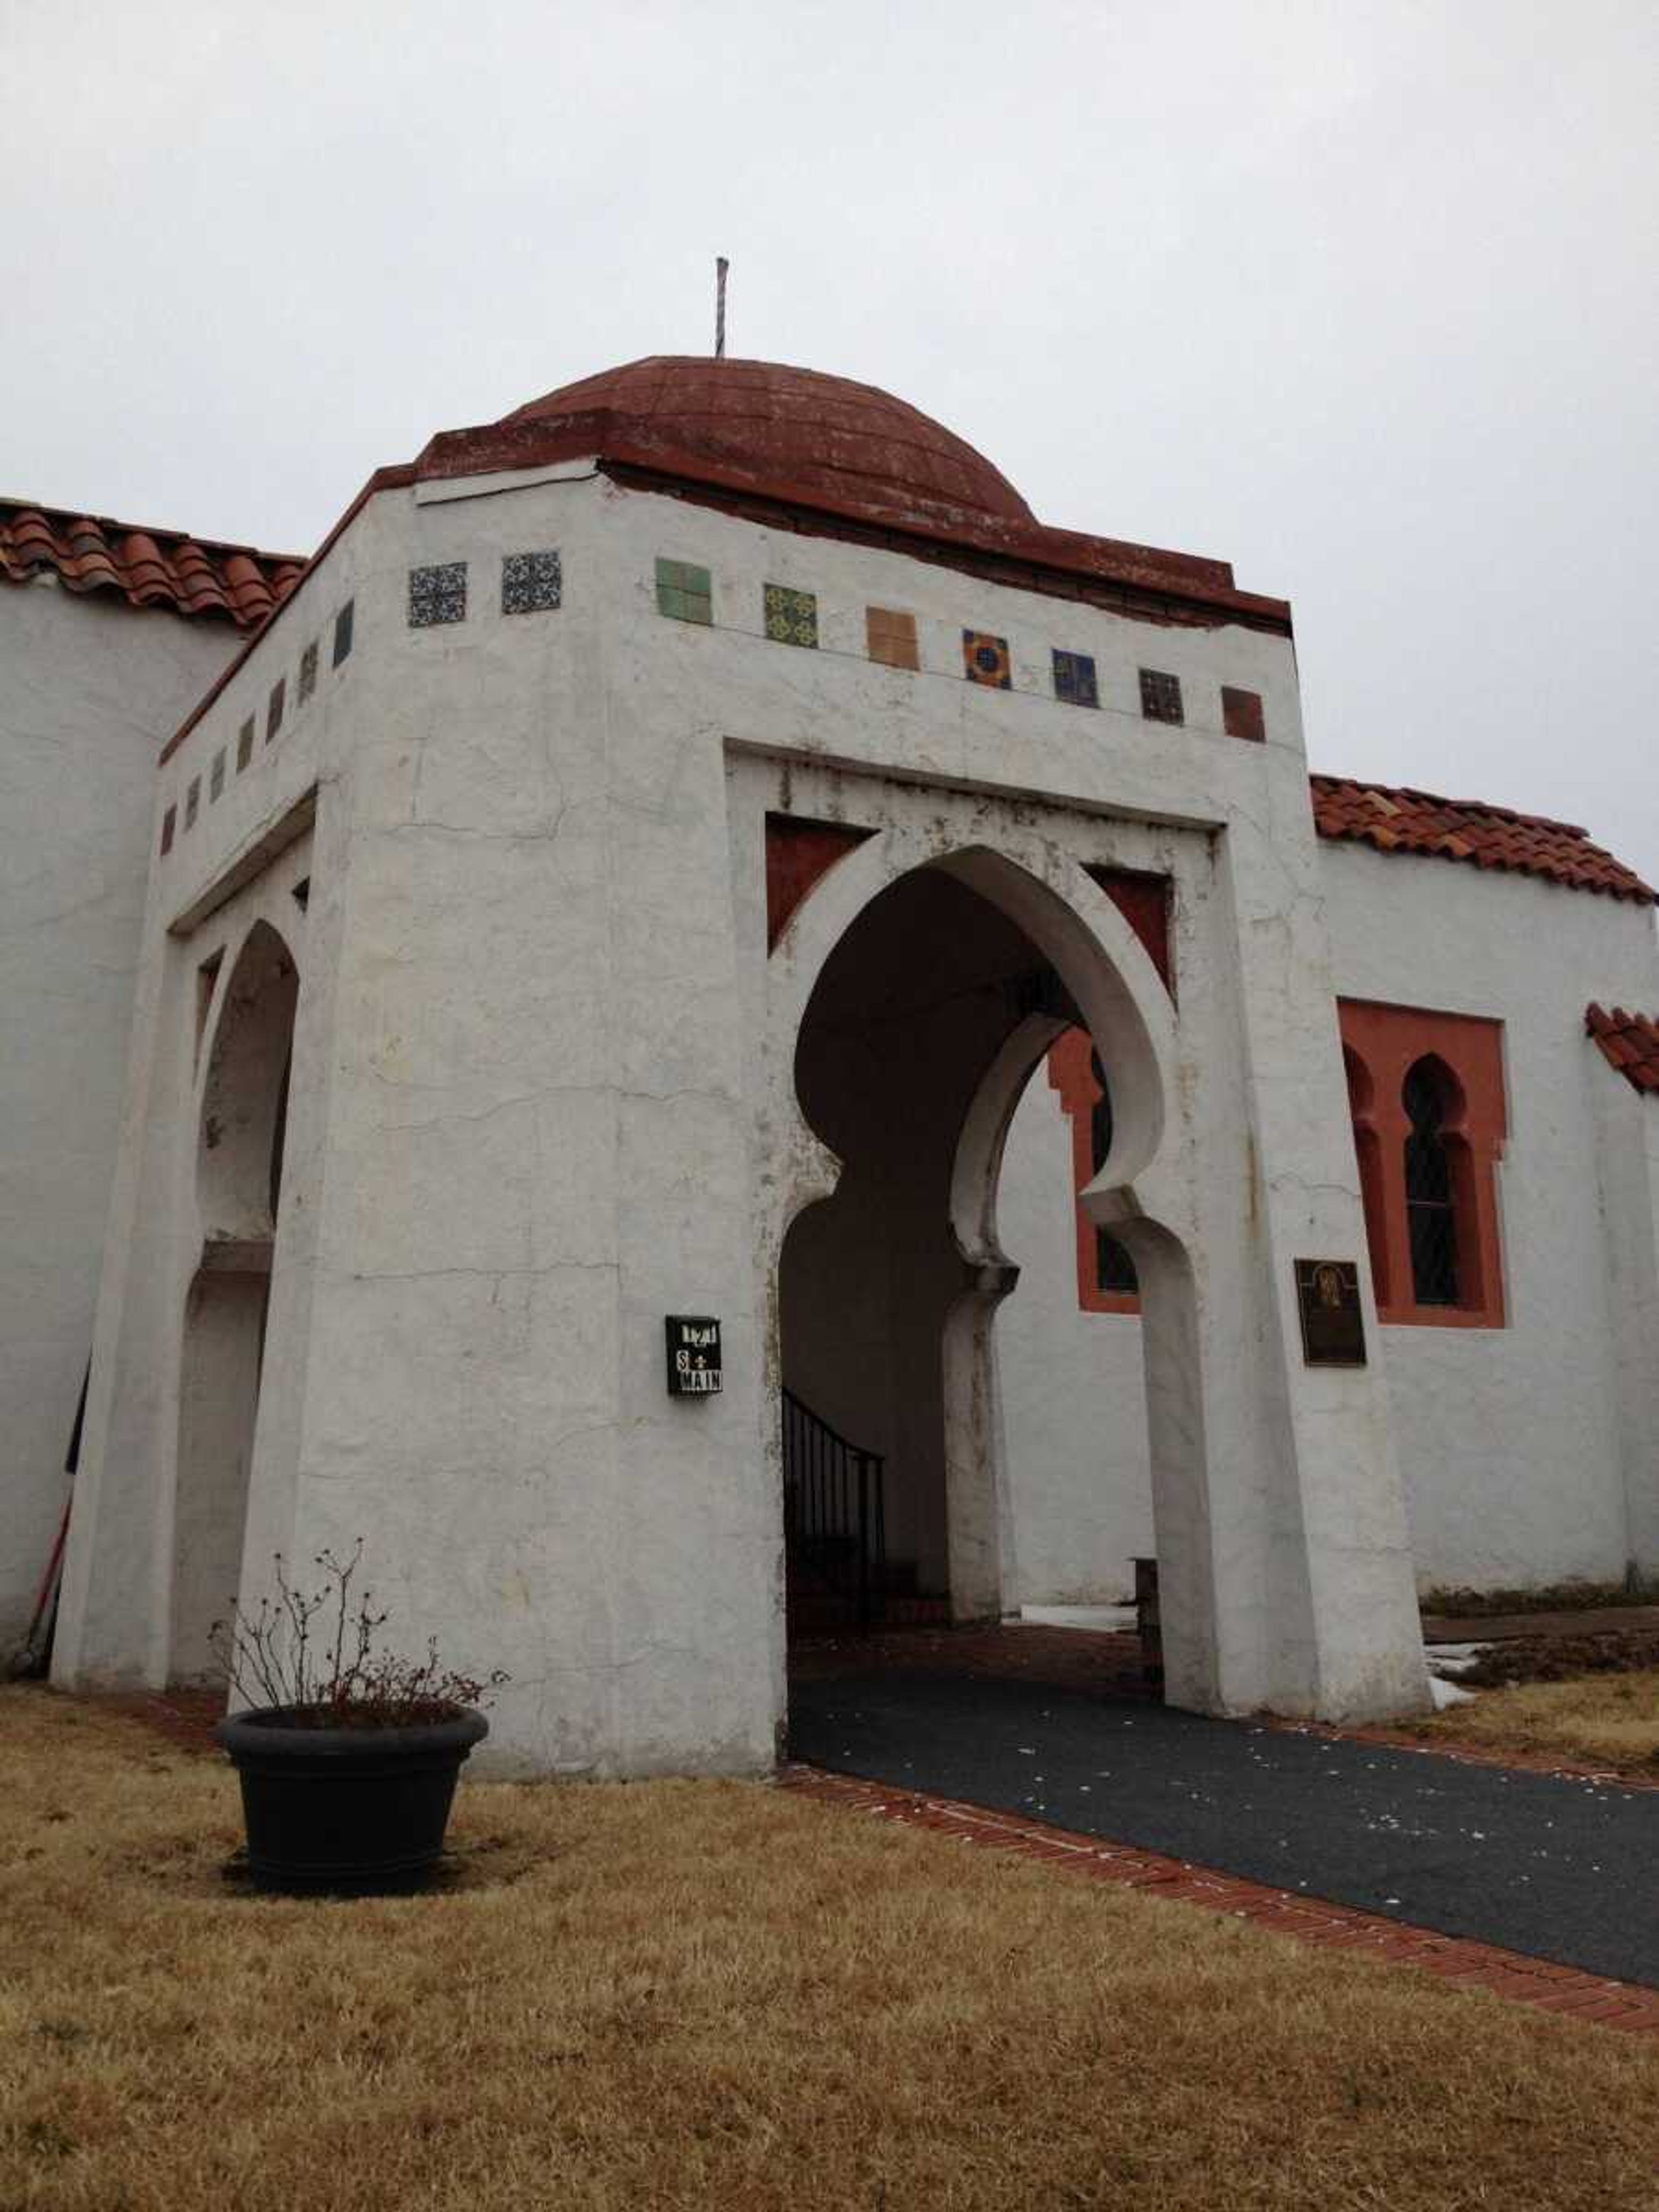 Church restores Cape Girardeau synagogue after years of abandonment